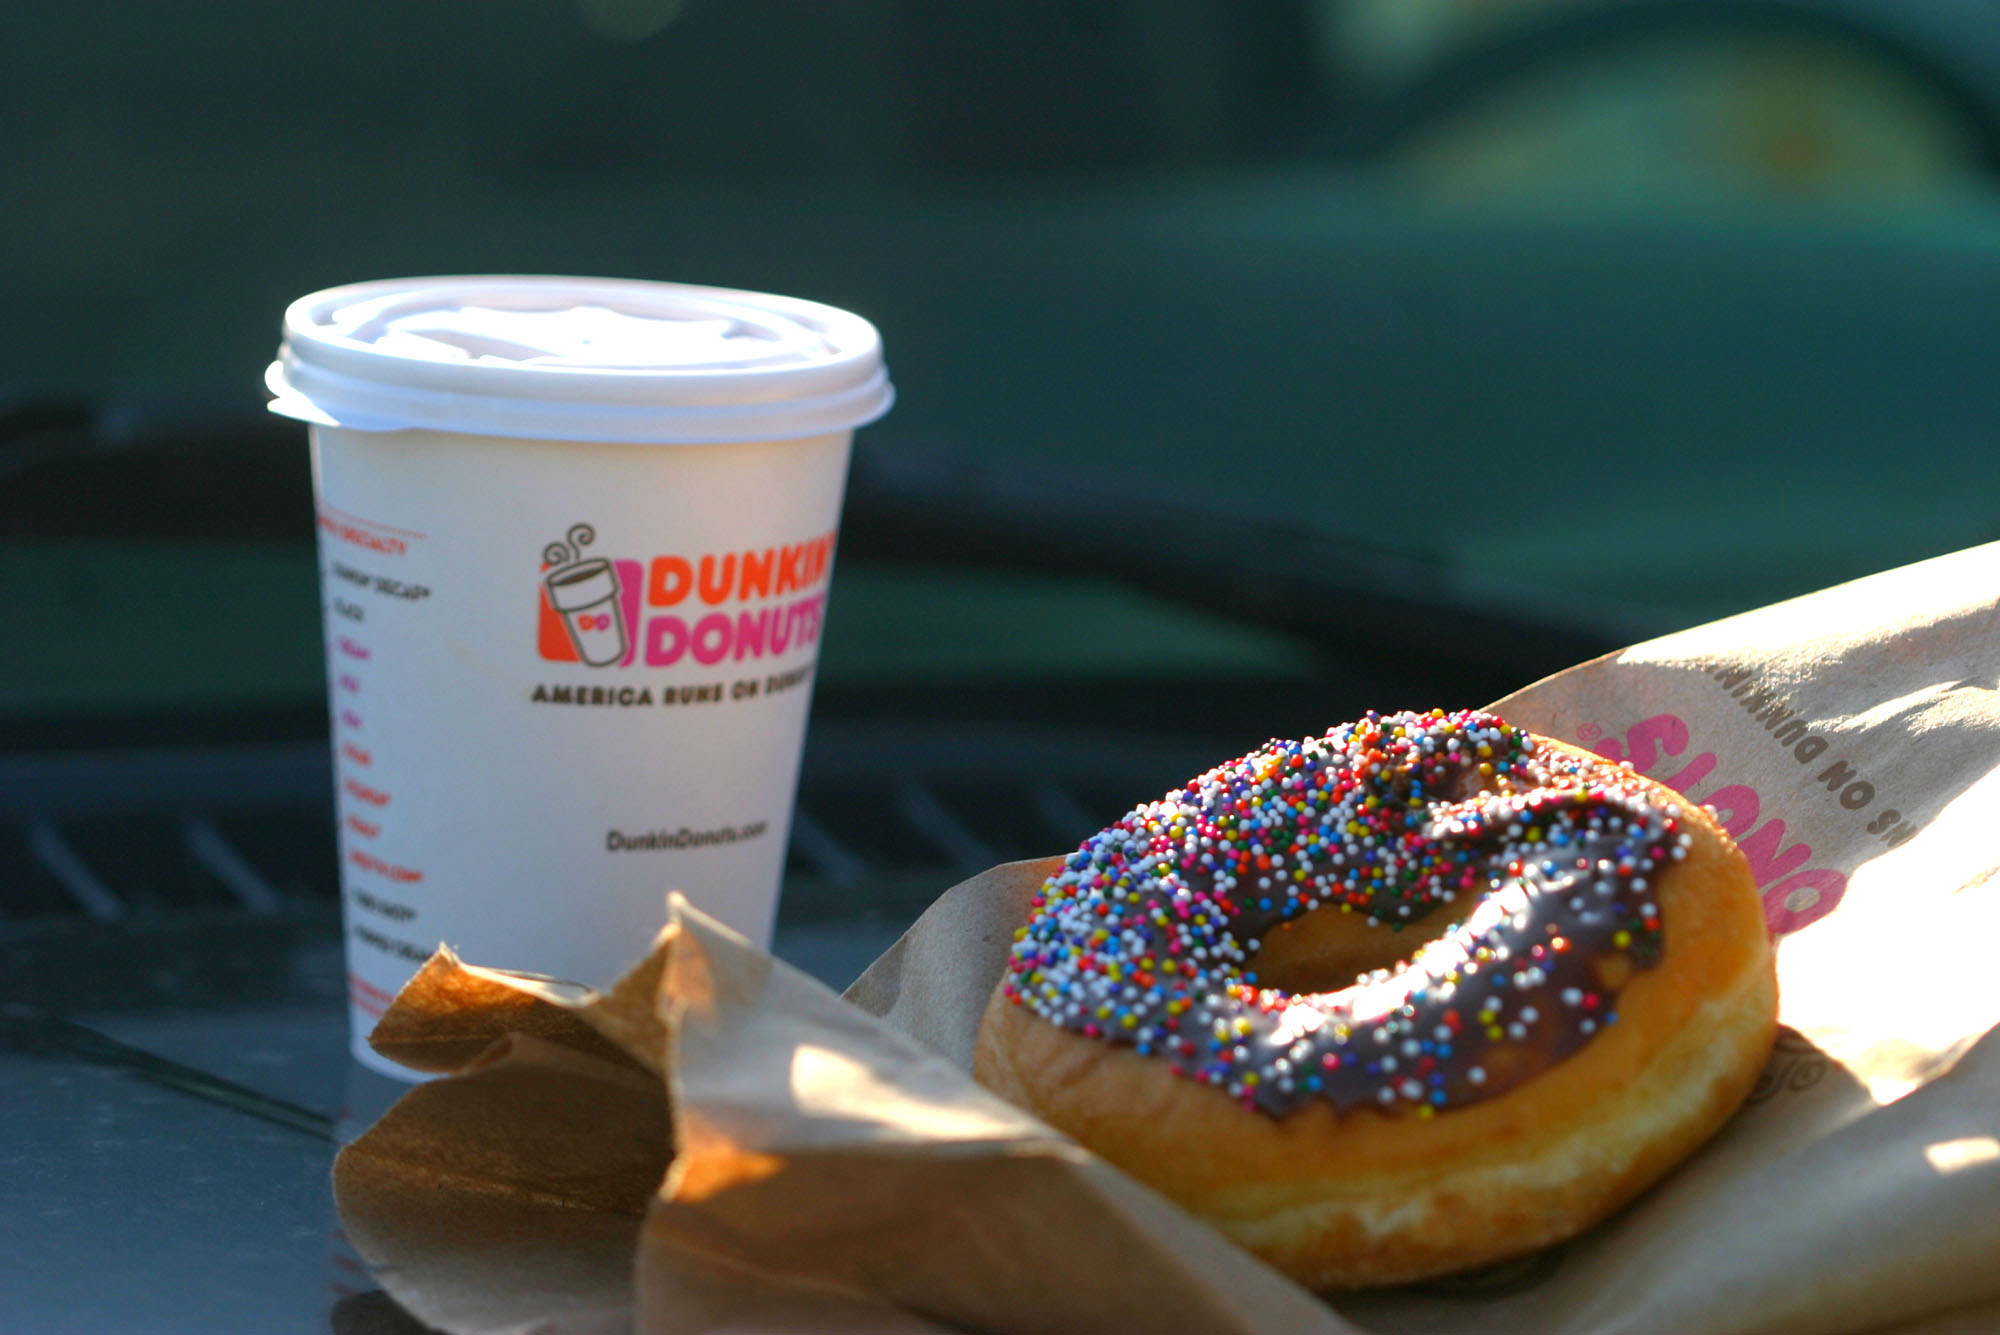 Get Free Dunkin Donuts Cold Brew Today, Friday April 6